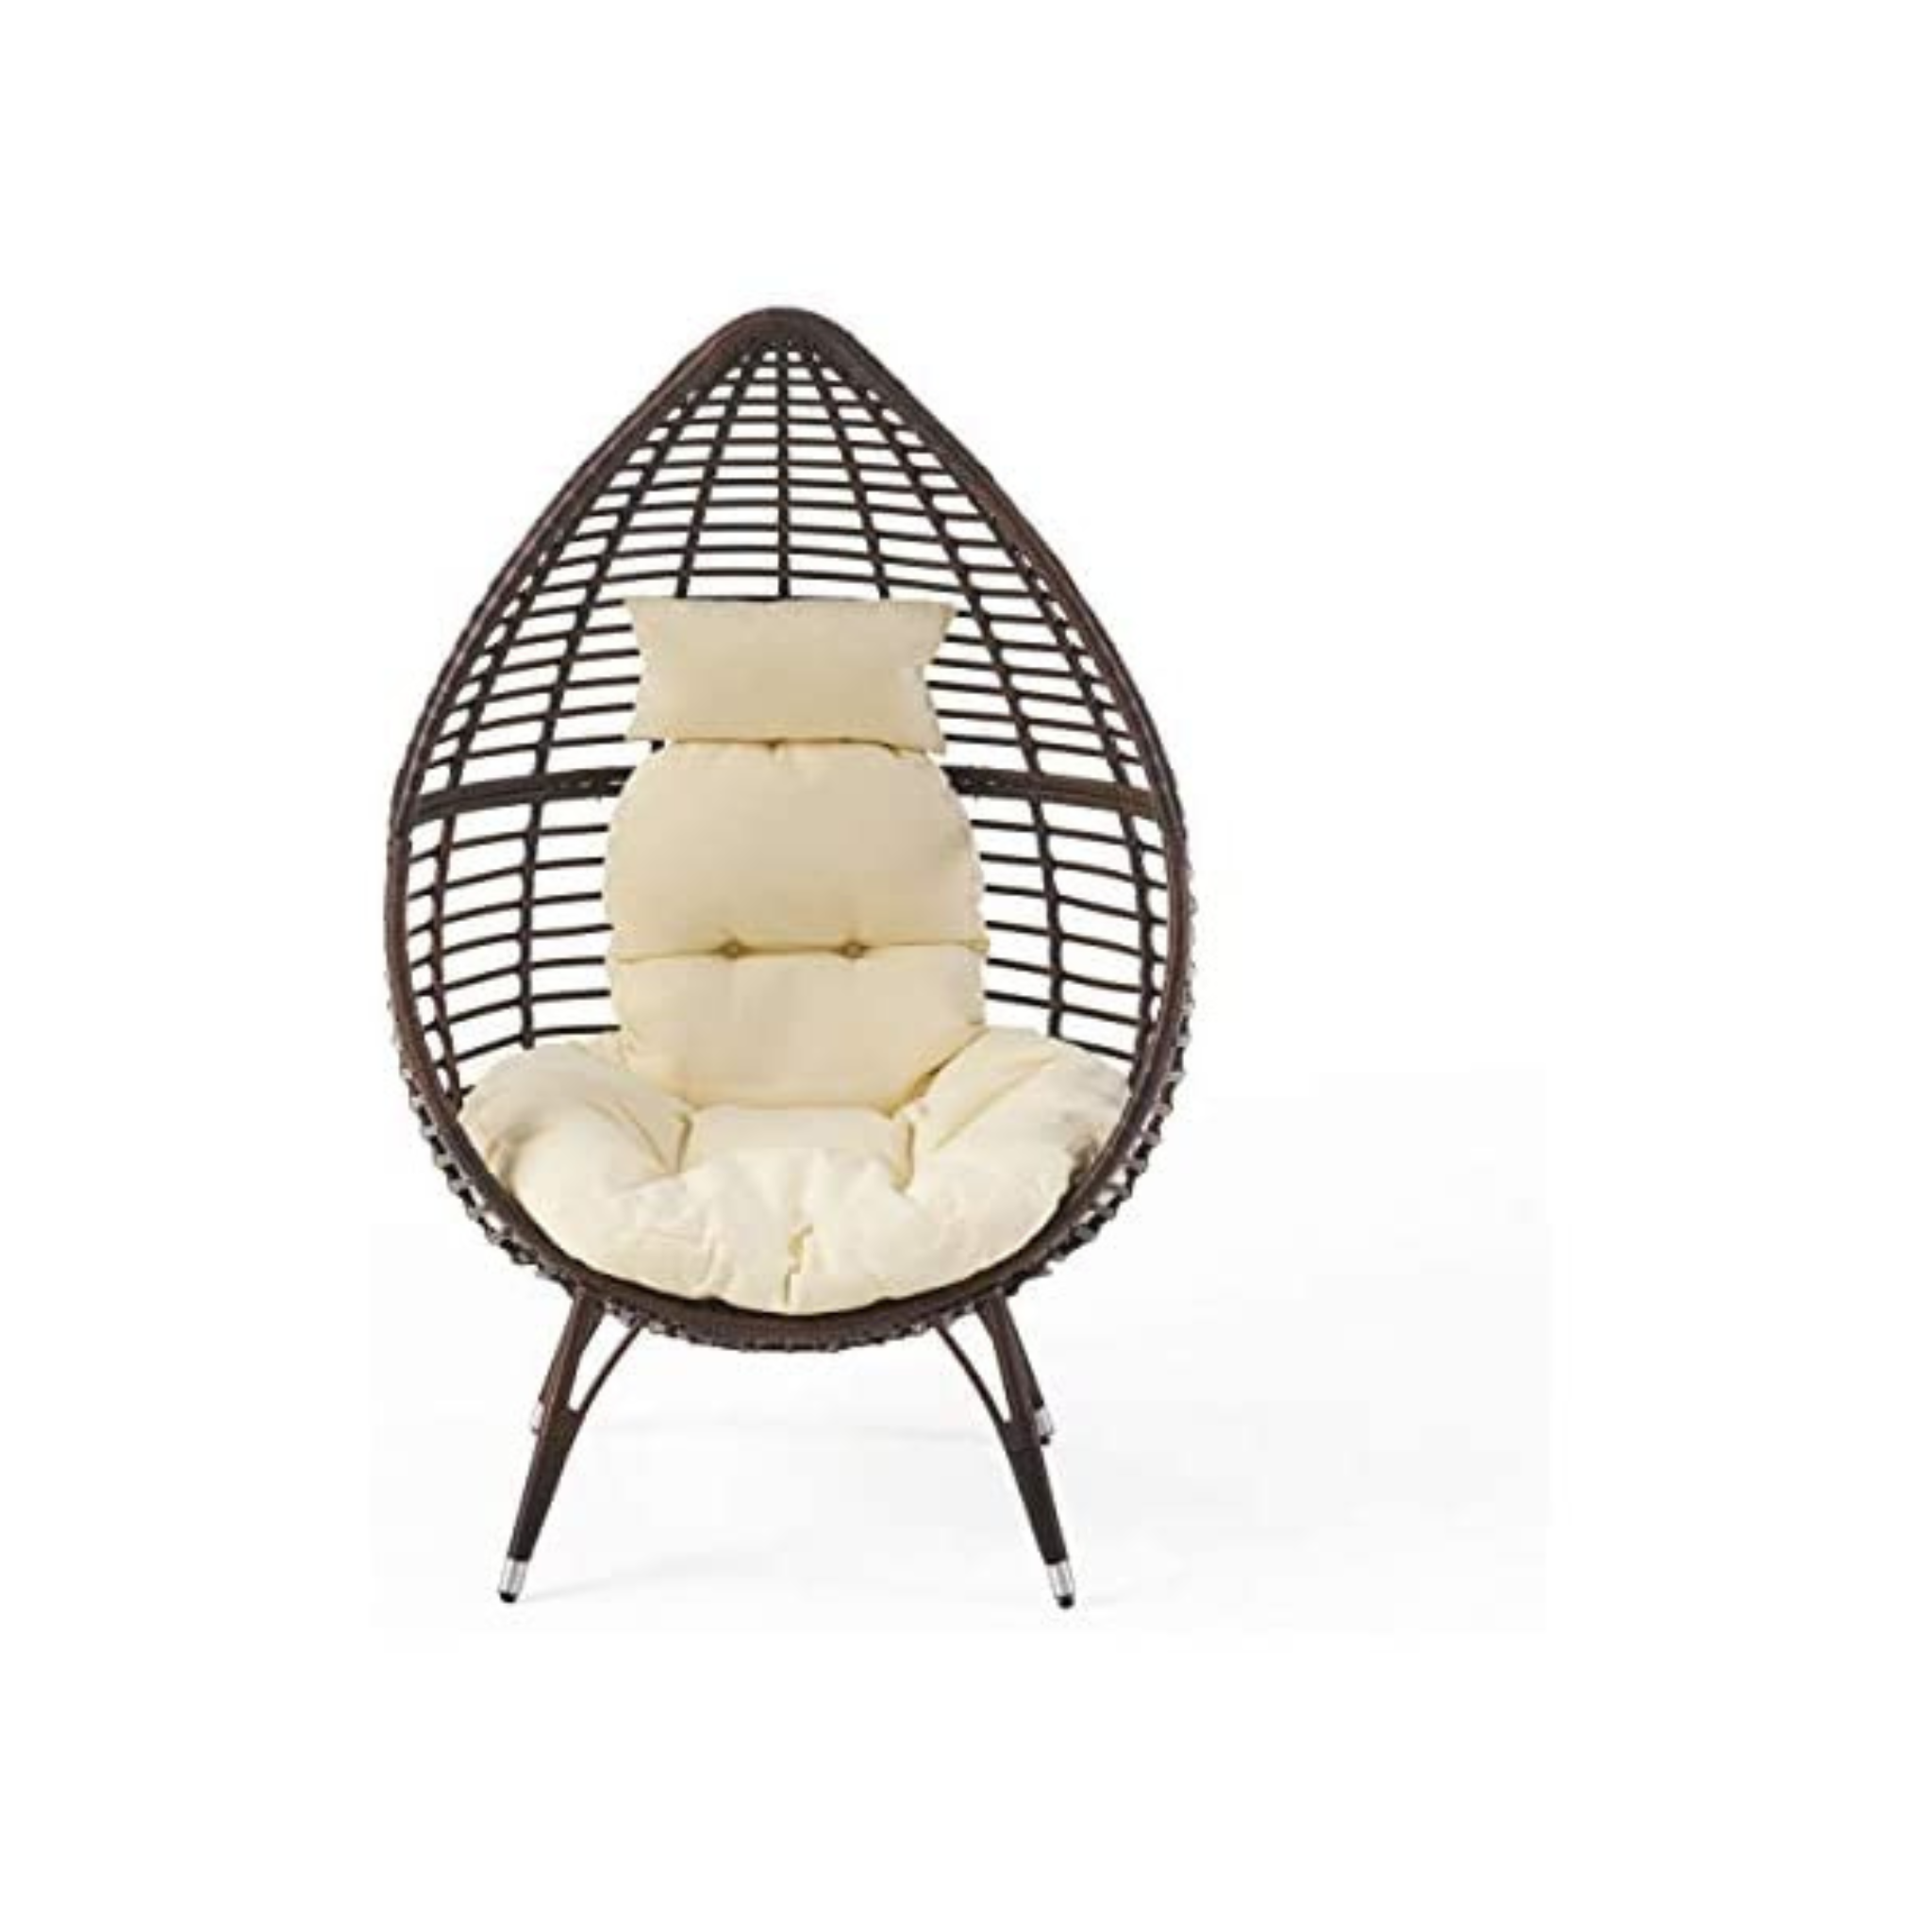 Christopher Knight Home Cutter Teardrop Wicker Lounge Chair with Cushion